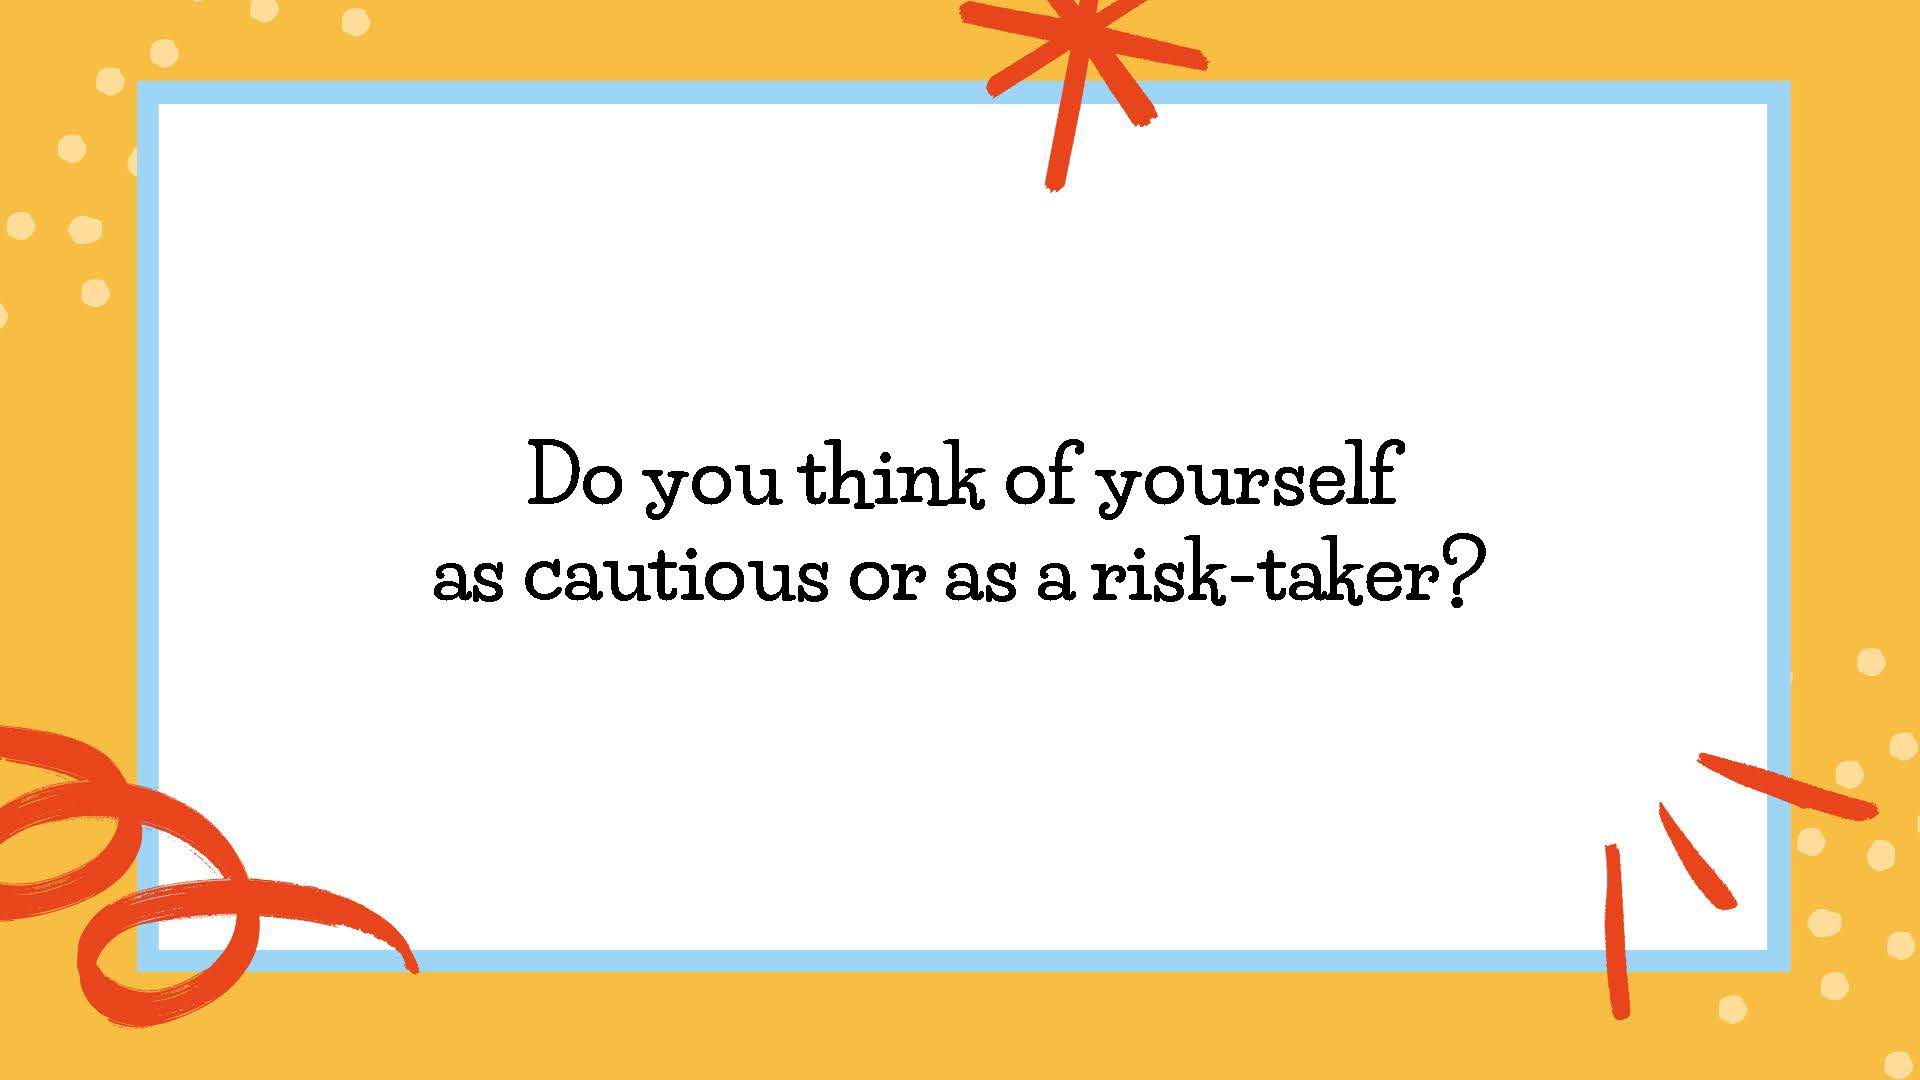 Do you think of yourself as cautious or as a risk-taker?